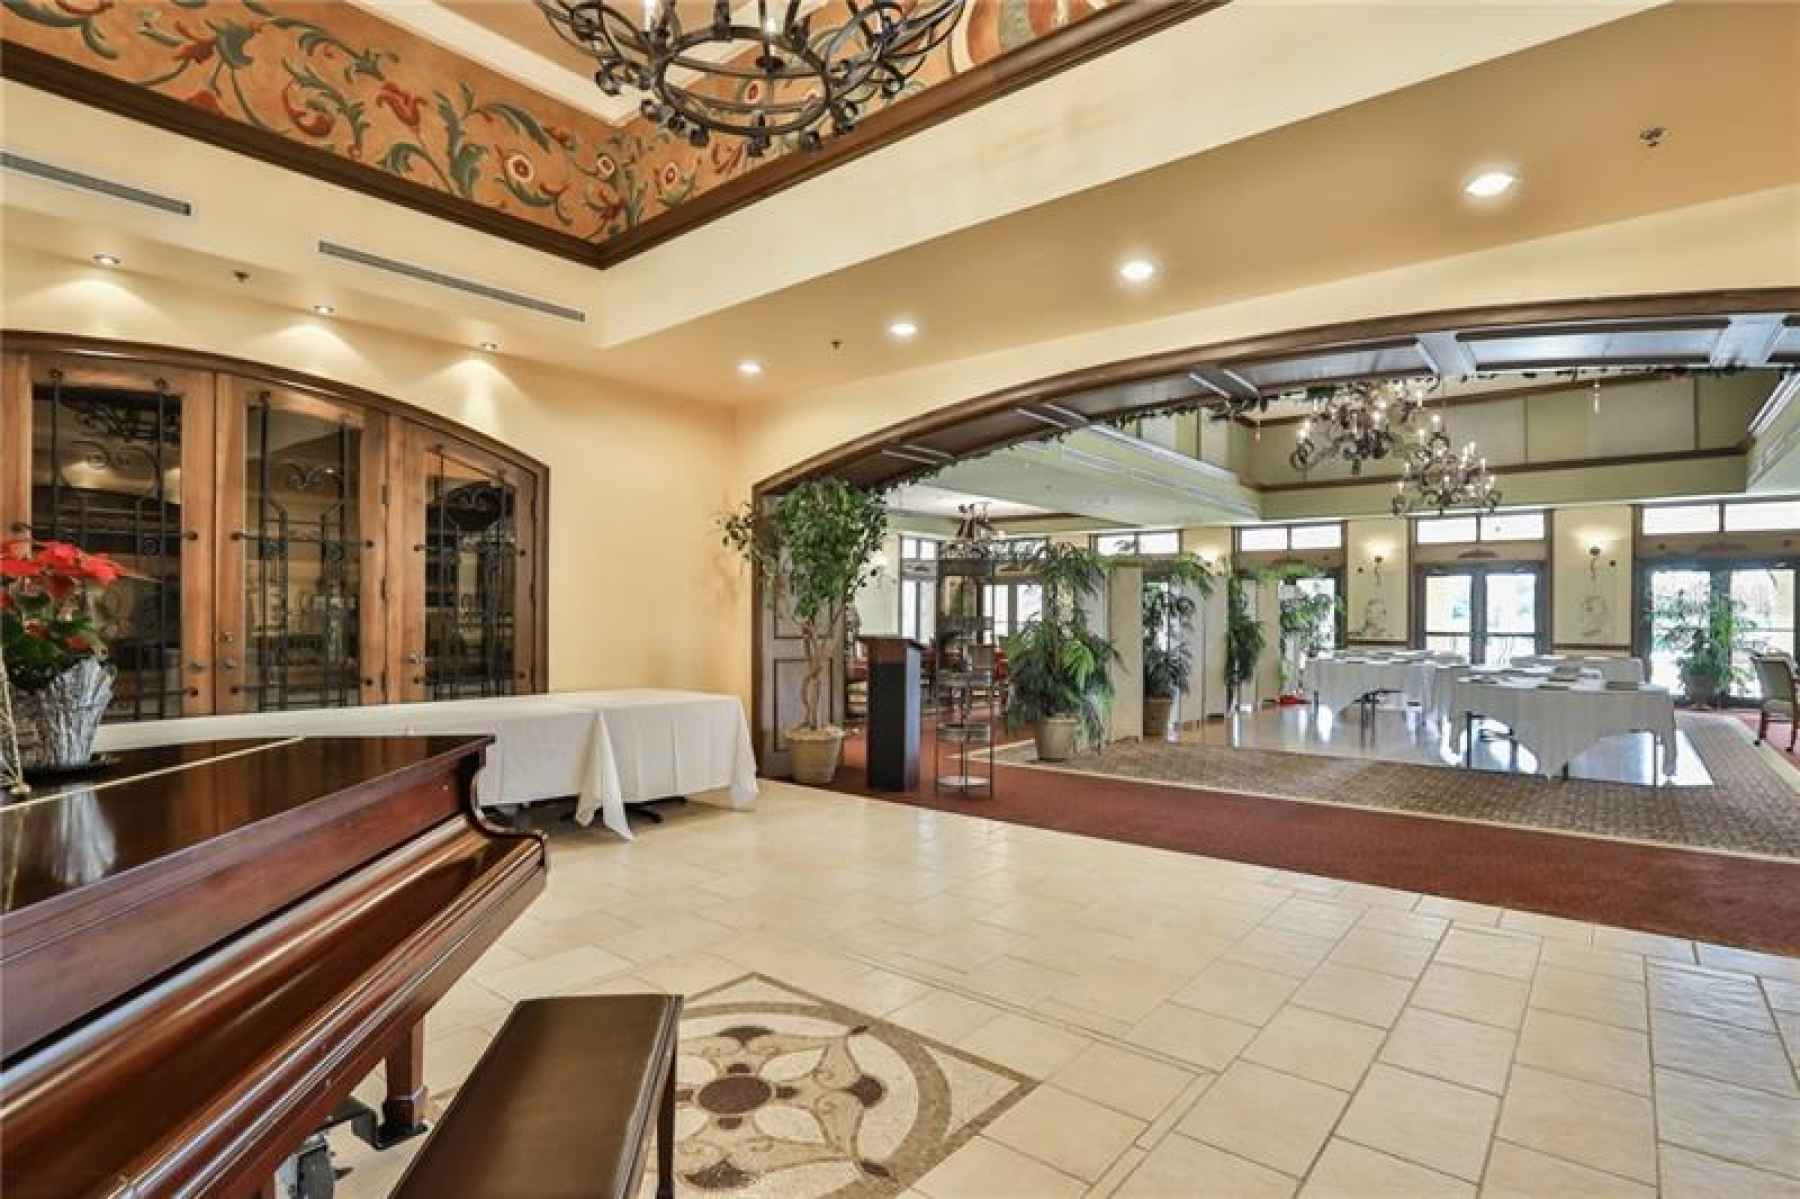 Renaissance Club offers entertainment and dining.